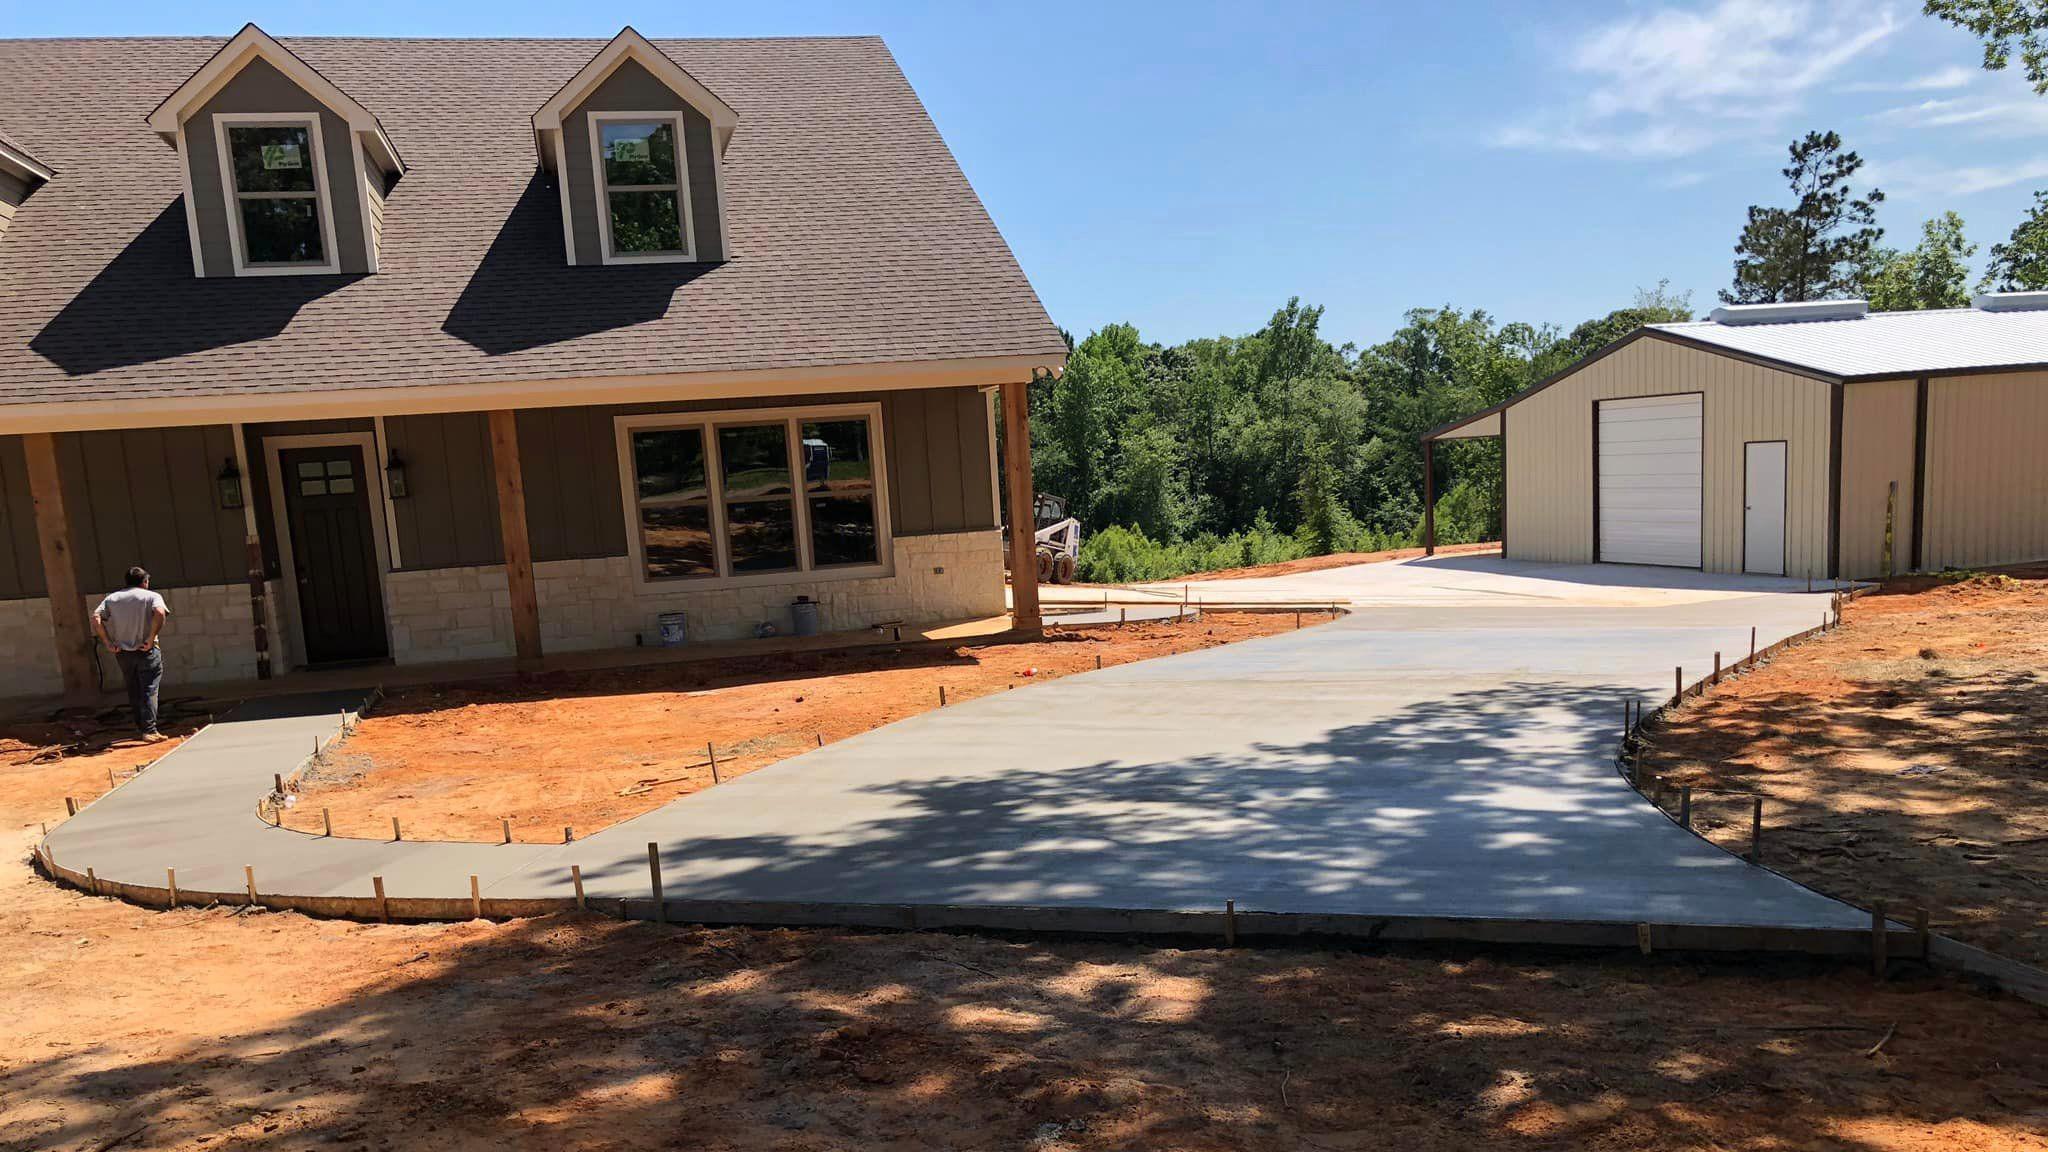 ETX Concrete Works is your trusted partner for all your concrete needs. Our experienced concrete contractors bring expertise and precision to every project, delivering durable and reliable results. Whether you require new construction, repairs, or decorative concrete work, count on us for top-notch craftsmanship and unparalleled service.